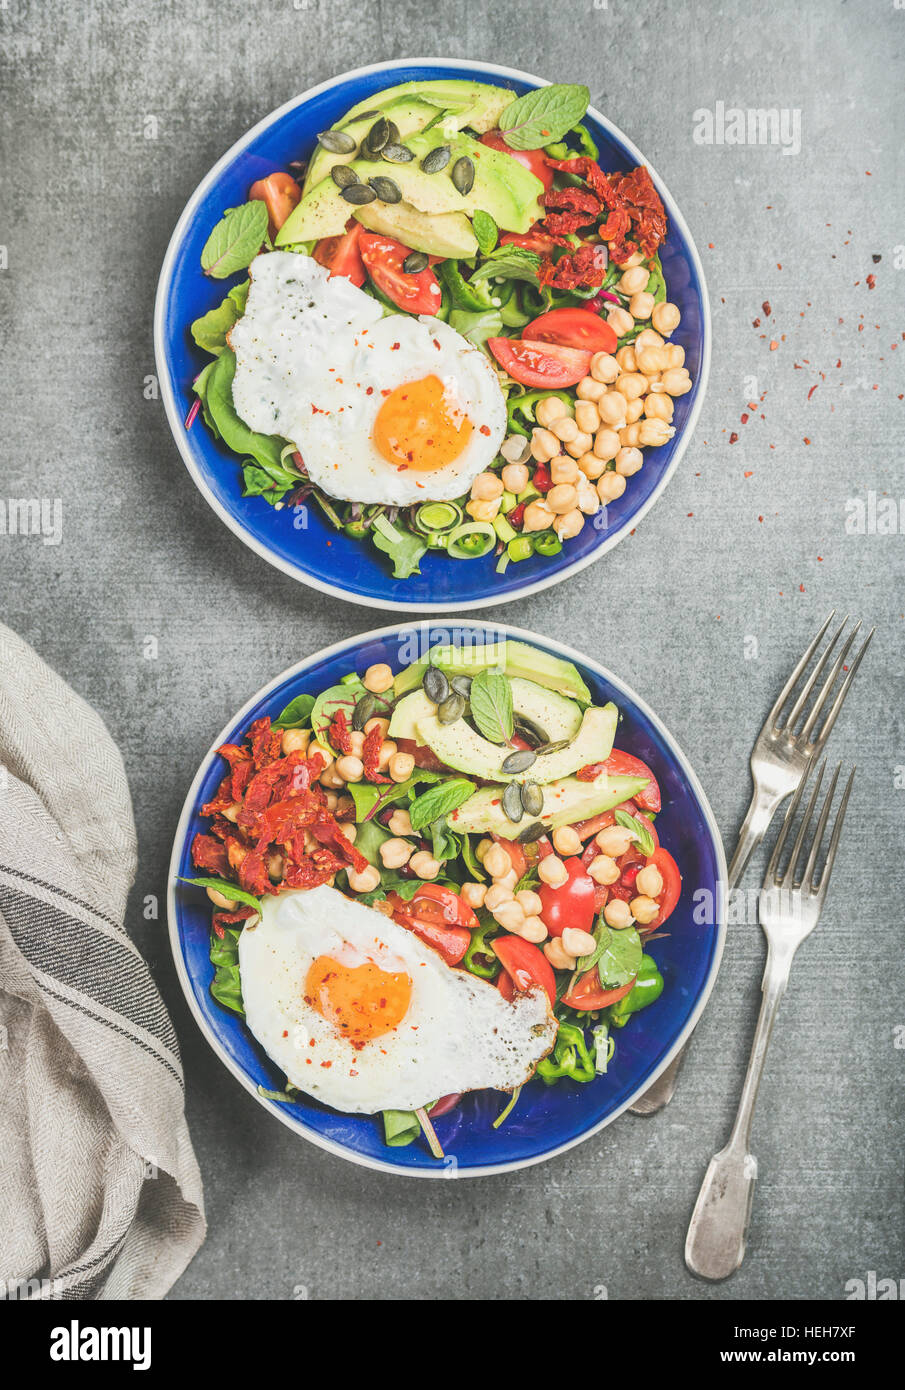 Healthy breakfast with fried egg, chickpea sprouts, seeds, fresh vegetables and greens in blue bowls over grey concrete background, top view. Clean ea Stock Photo